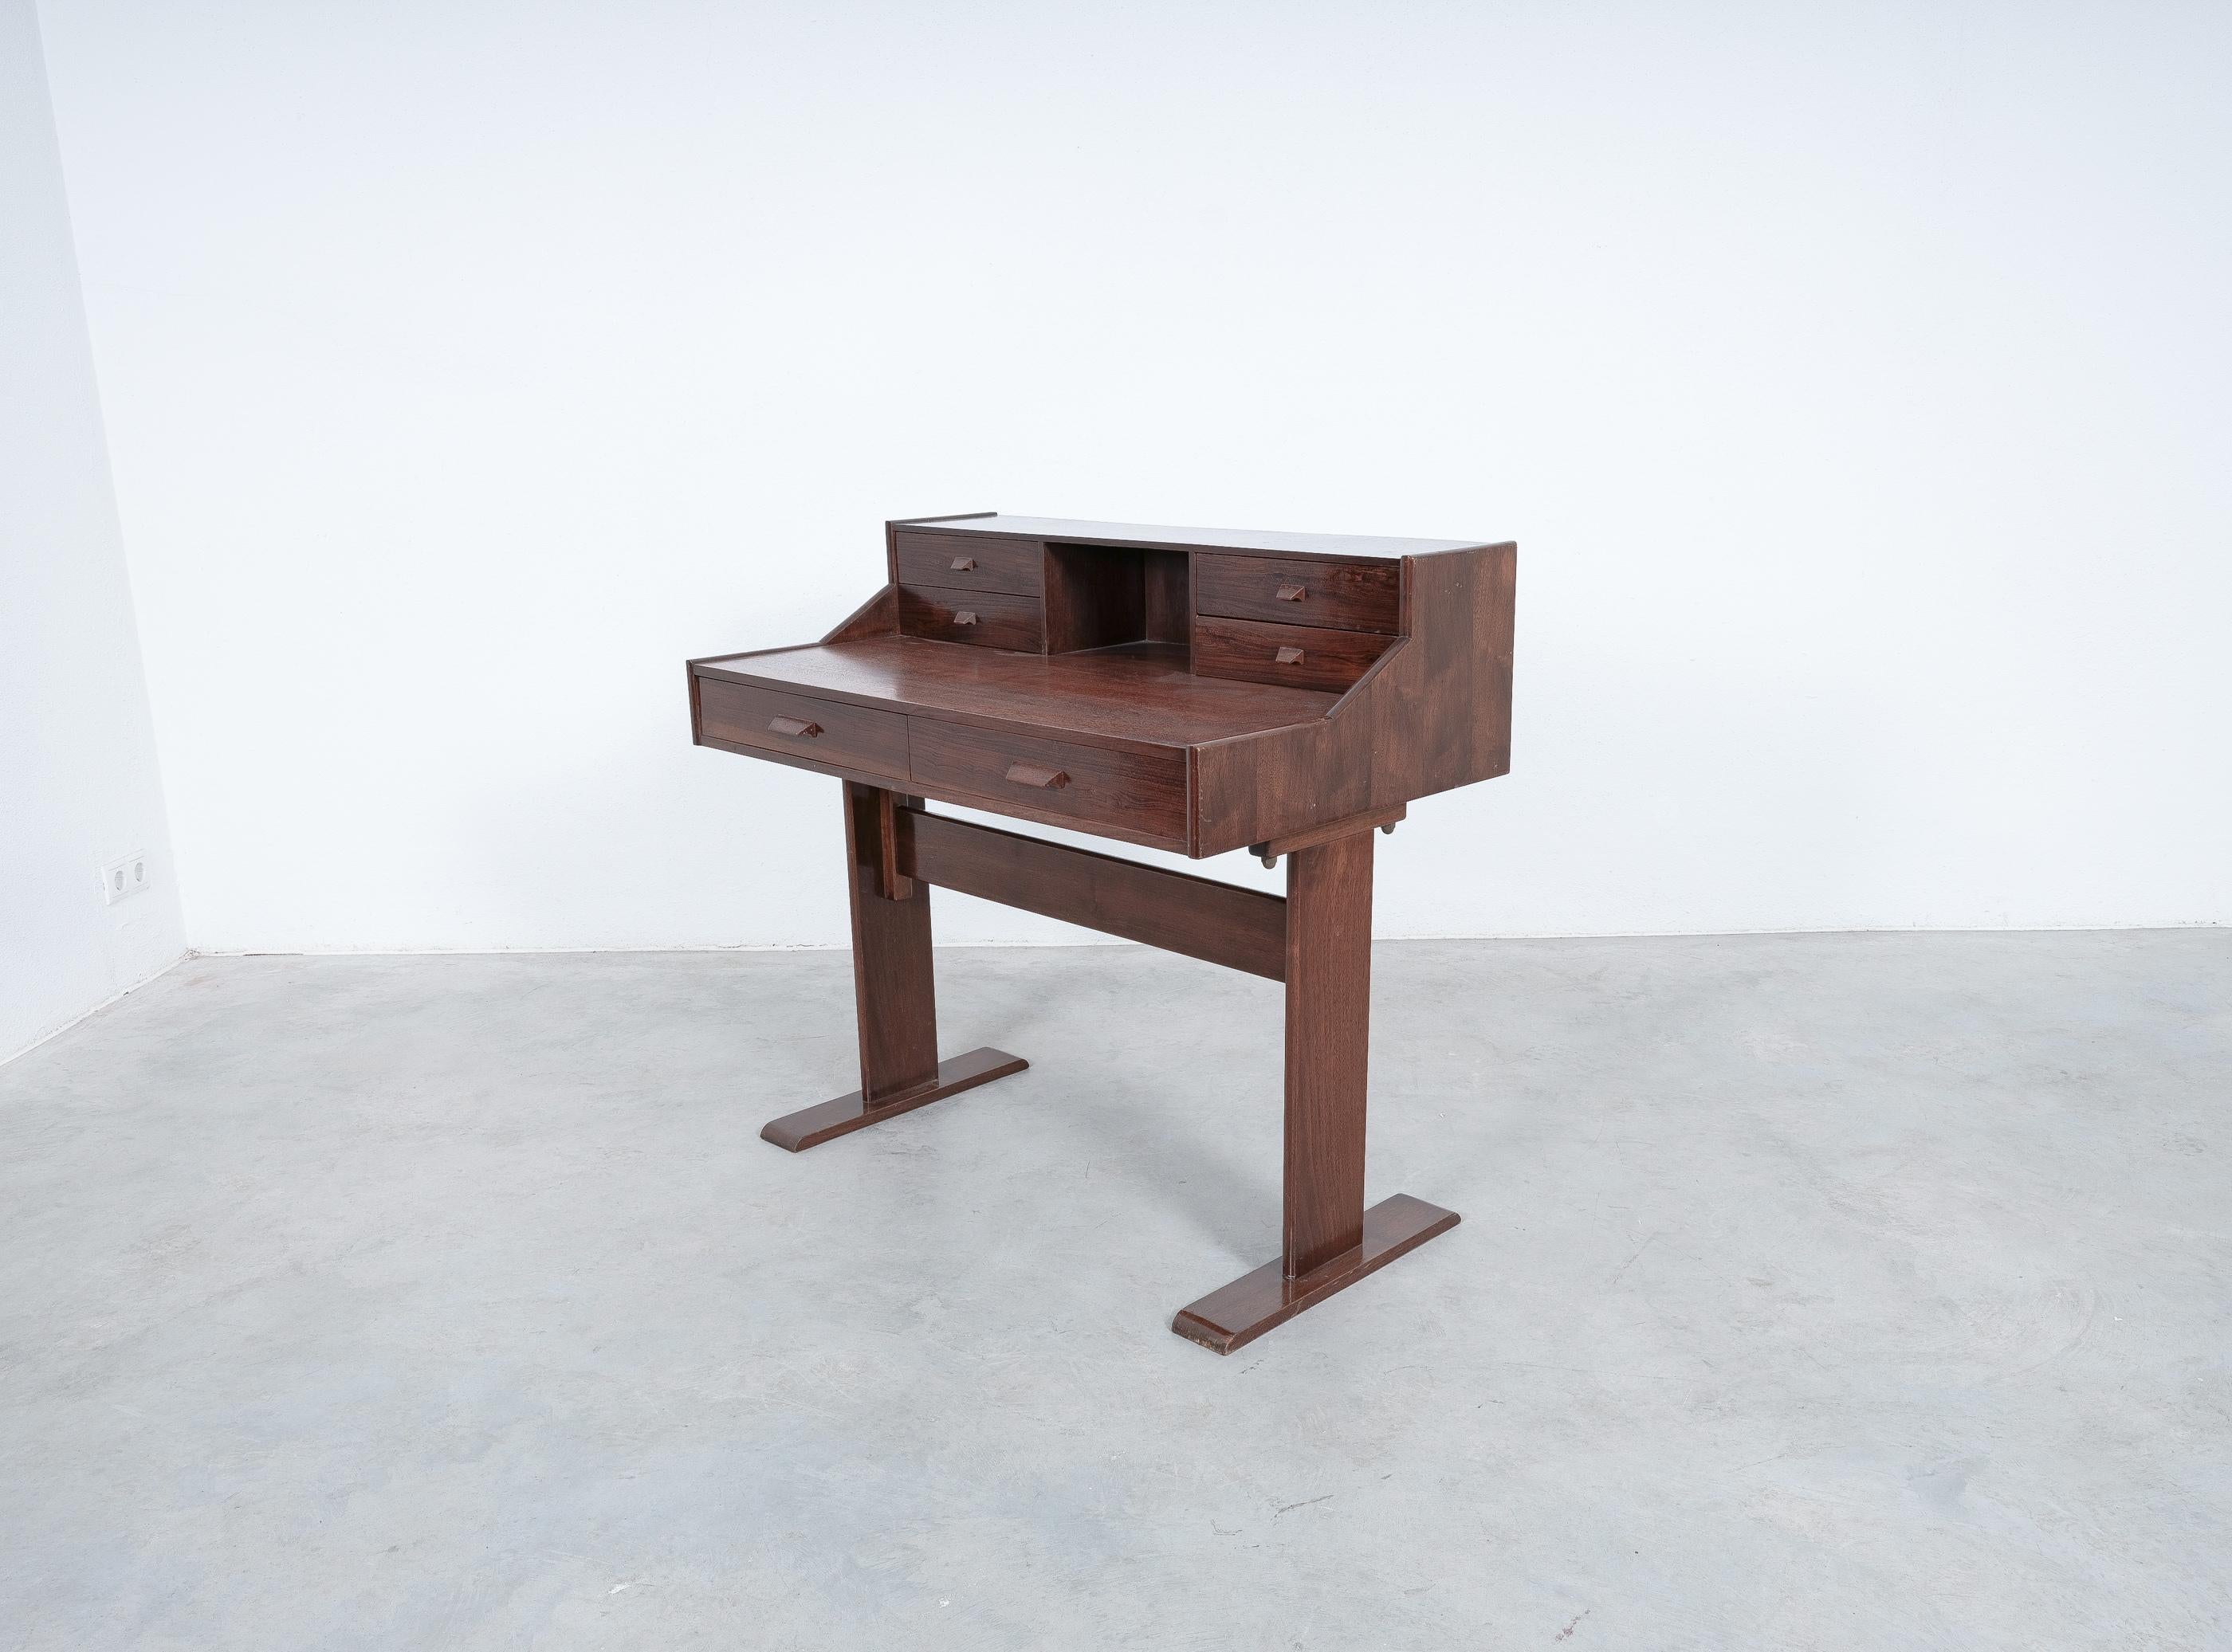 Writing desk, teak and veneer with many drawers, Italy, circa 1970

Dimensions are: 41.3